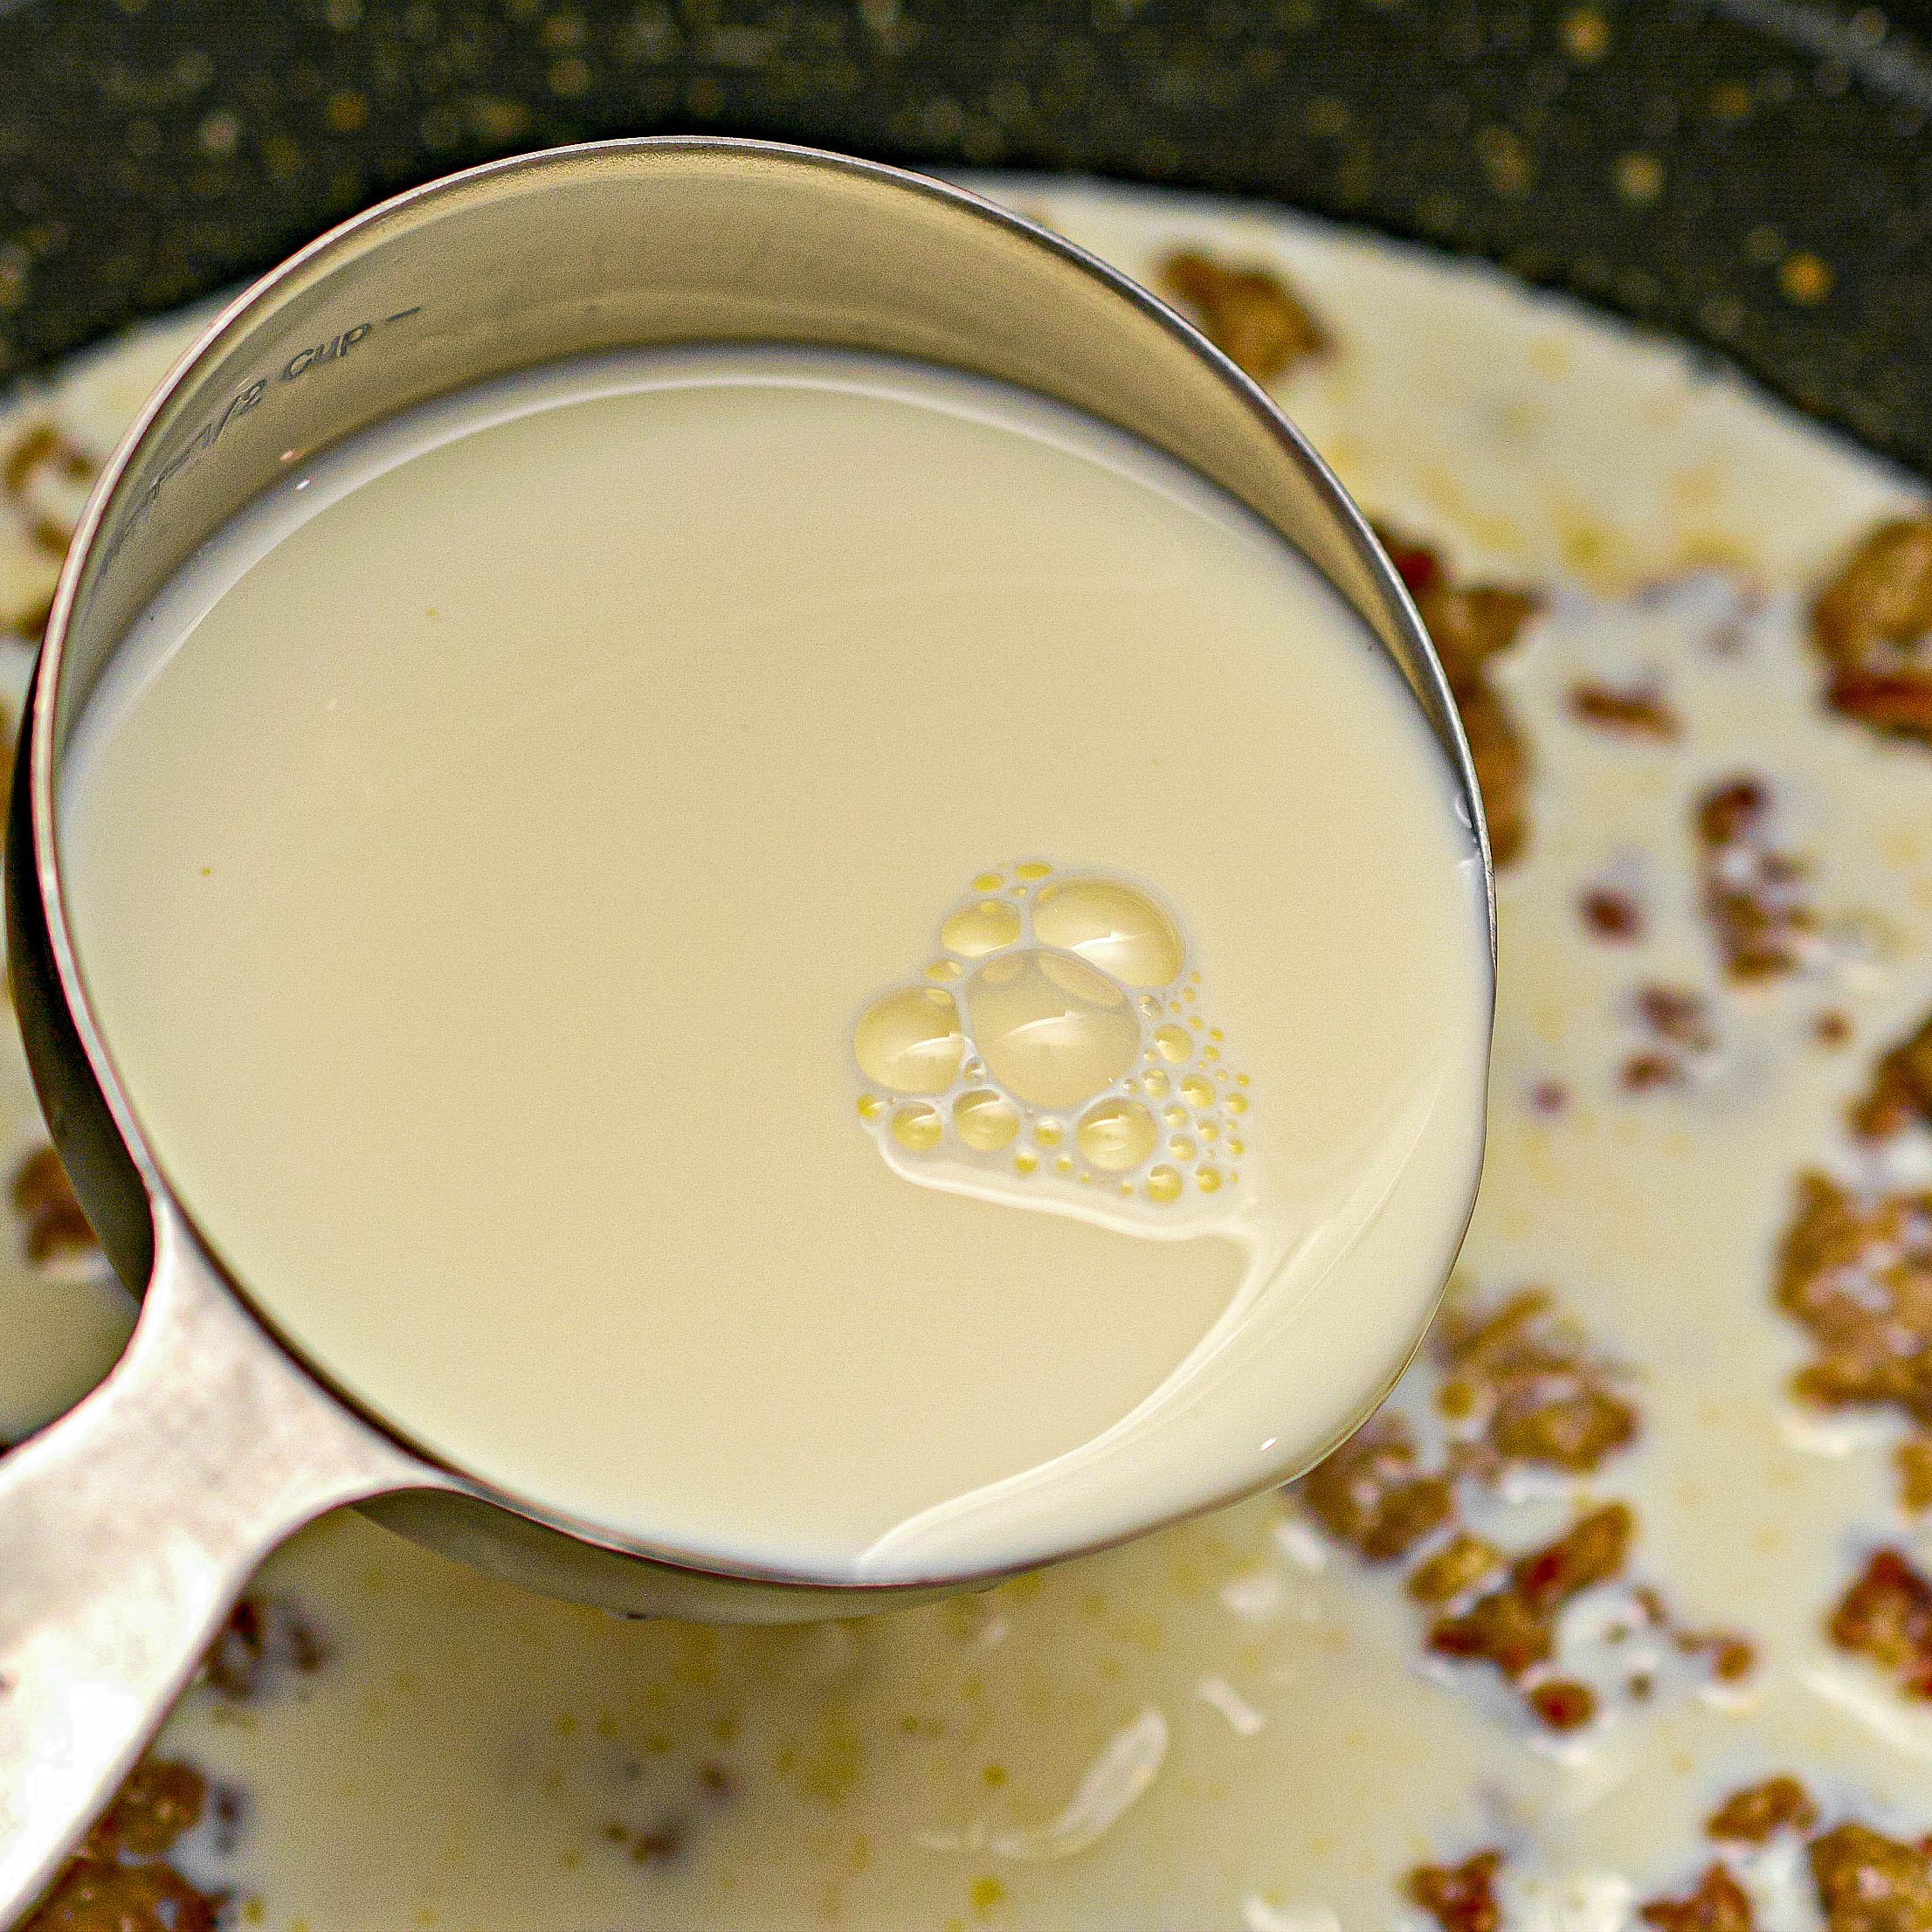 Whisk in the whole milk, and continue to cook until the gravy has thickened.